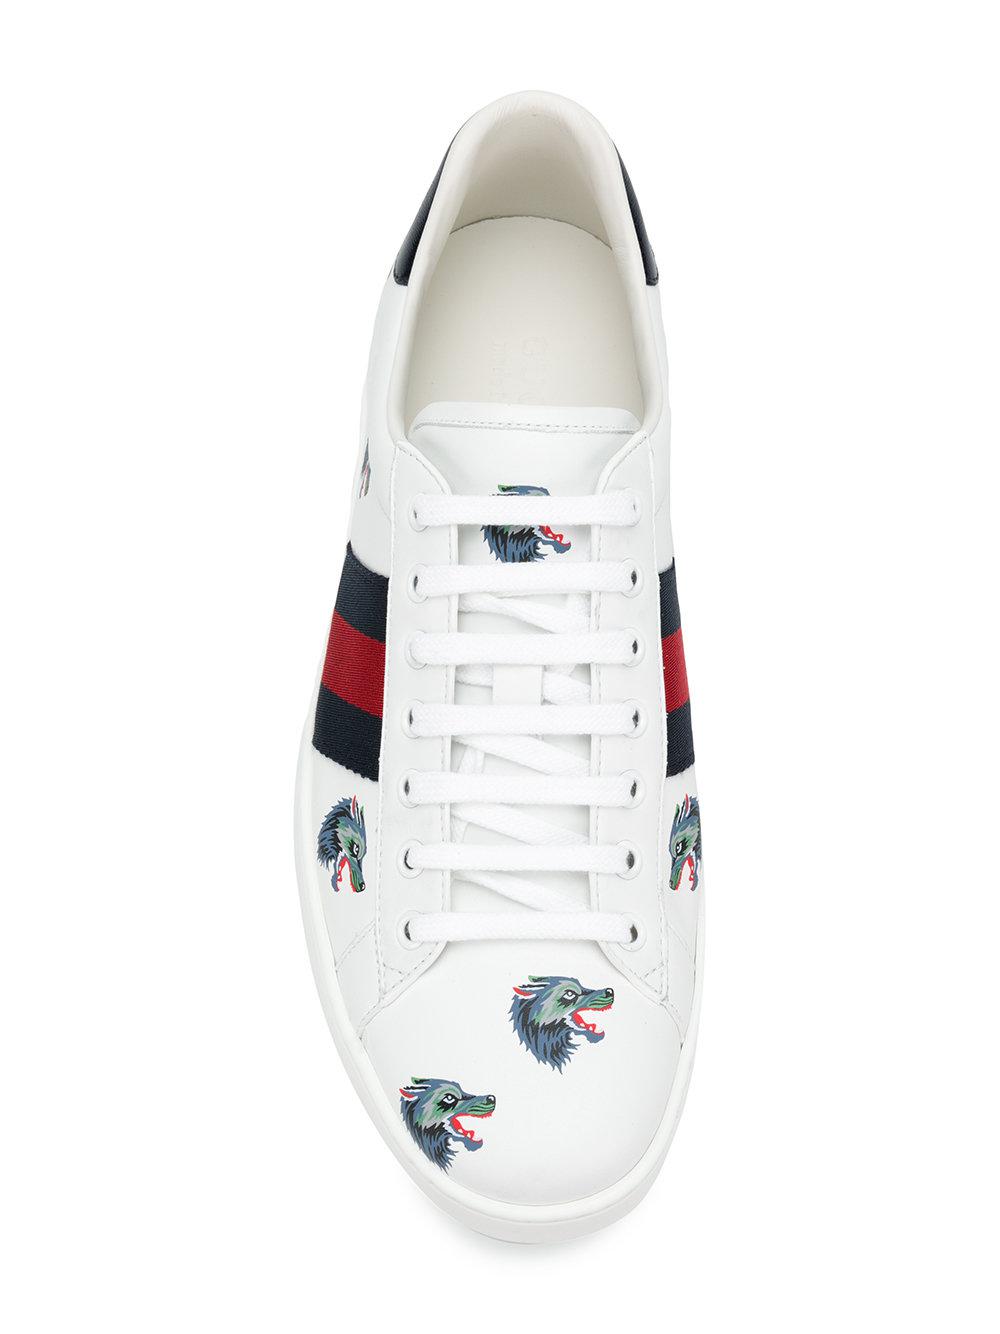 Gucci Ace Sneakers in White |